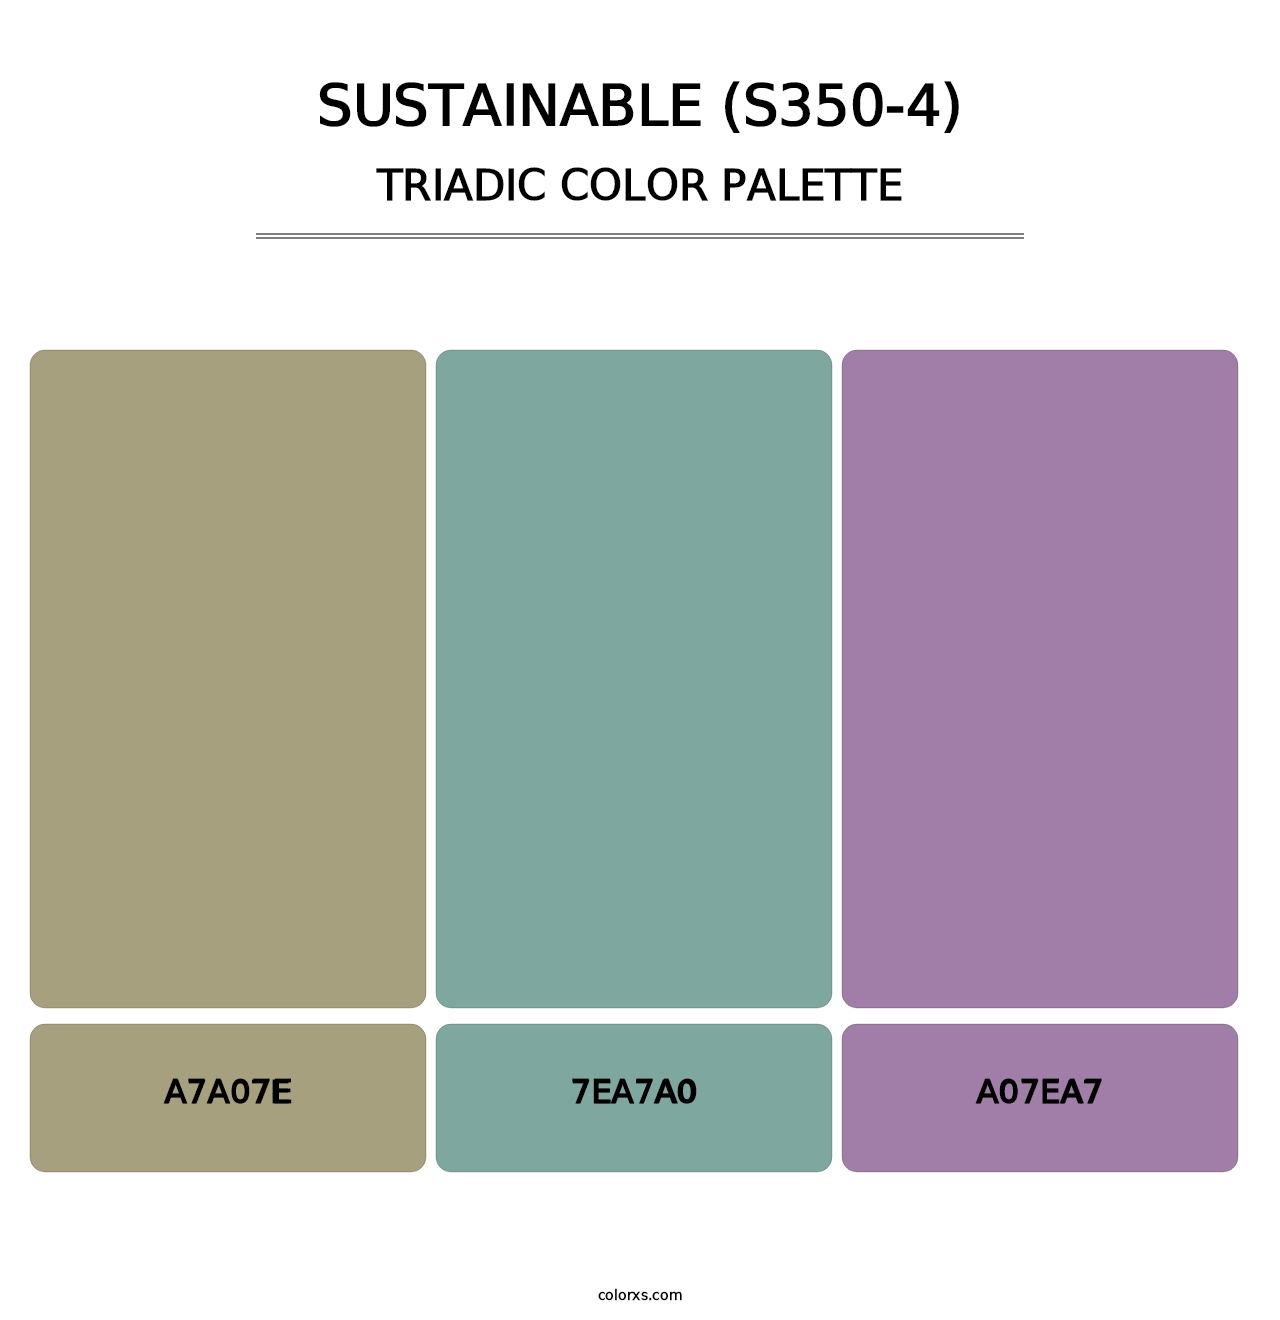 Sustainable (S350-4) - Triadic Color Palette